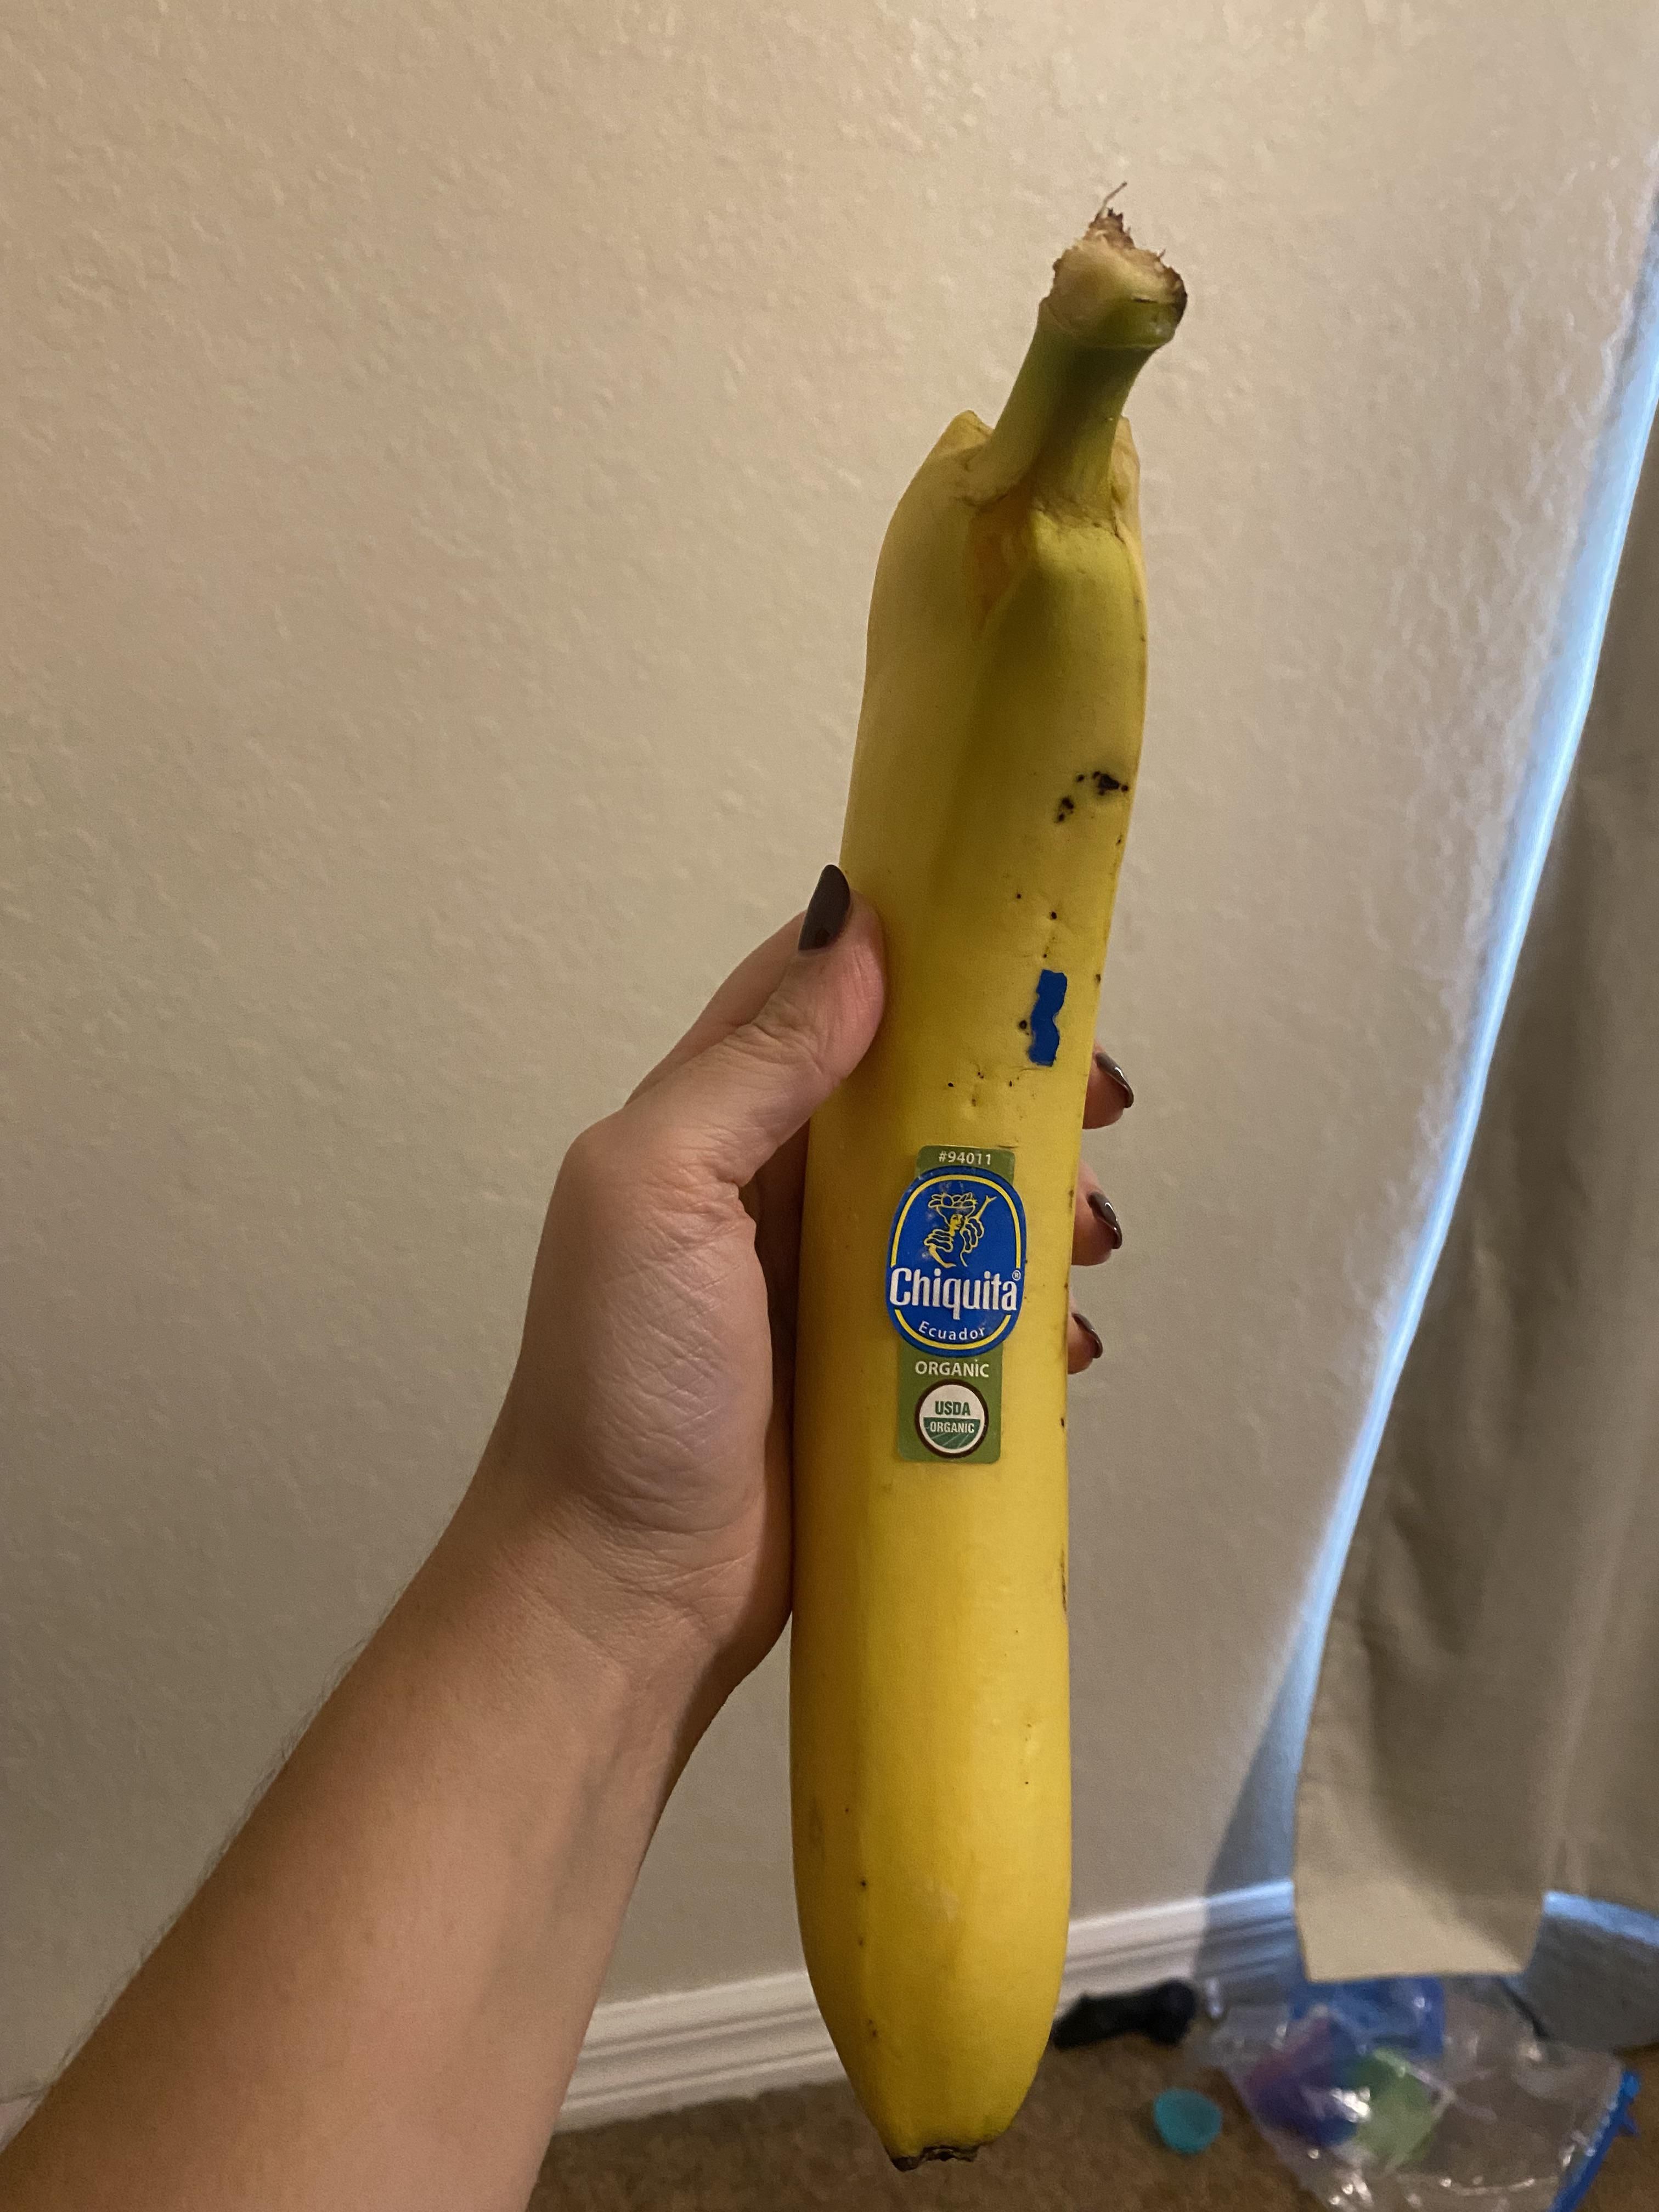 I see we’re posting giant bananas here today